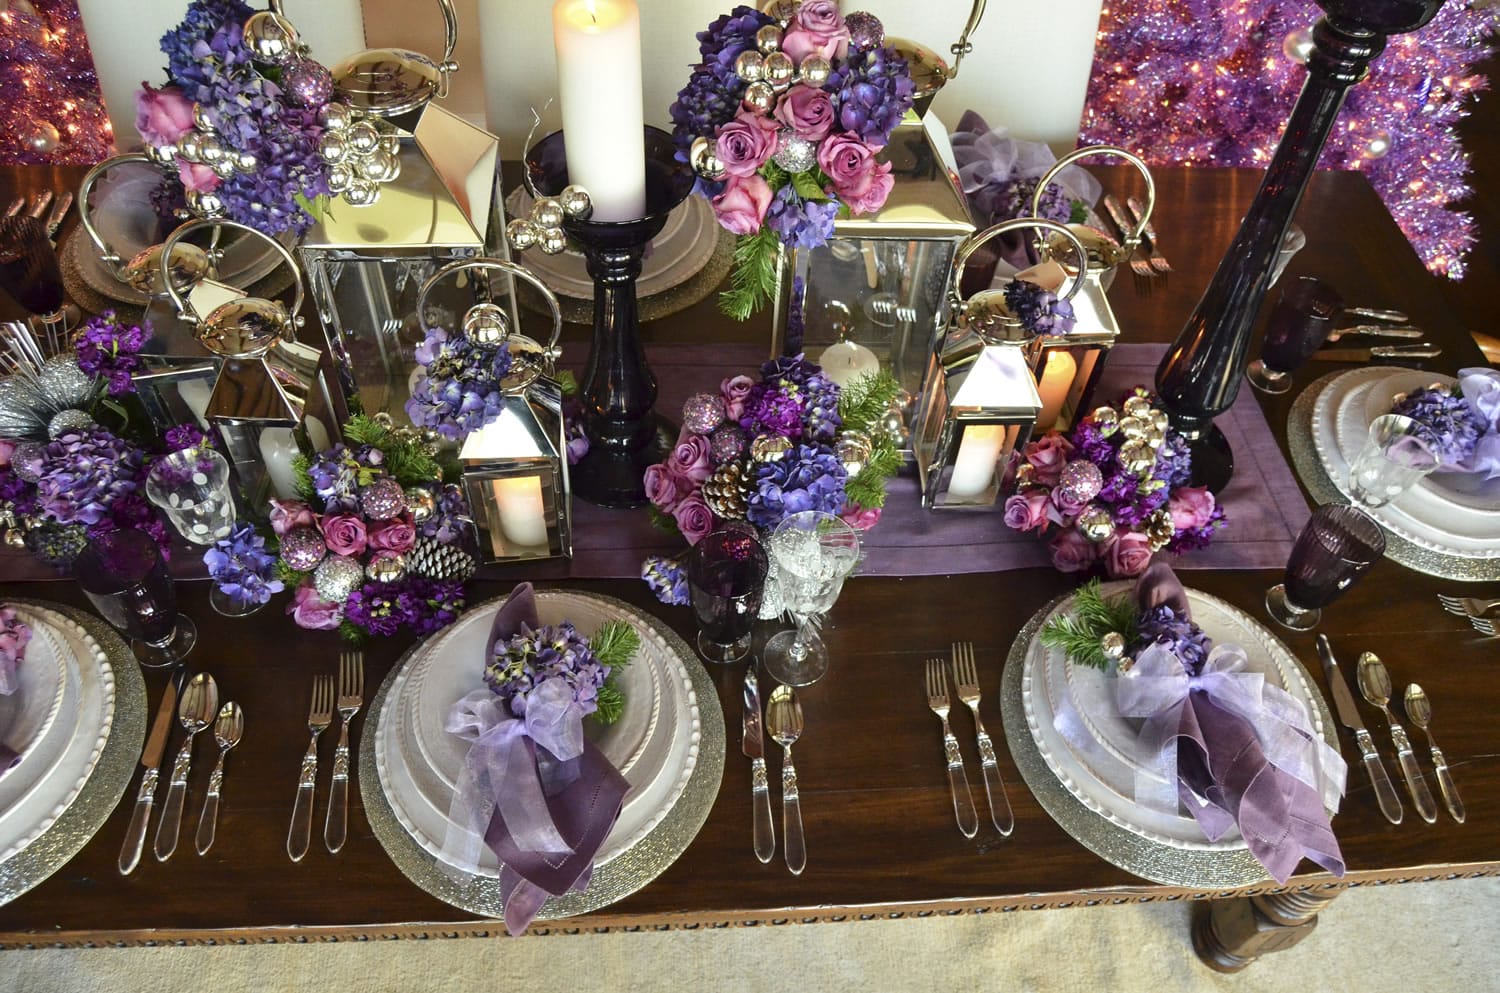 The holidays are a good time to introduce purple into the home, says Sandra Espinet, a guest designer on HGTV's &quot;Celebrity Holiday Homes&quot; who used purple in the home of actress Alison Sweeney.